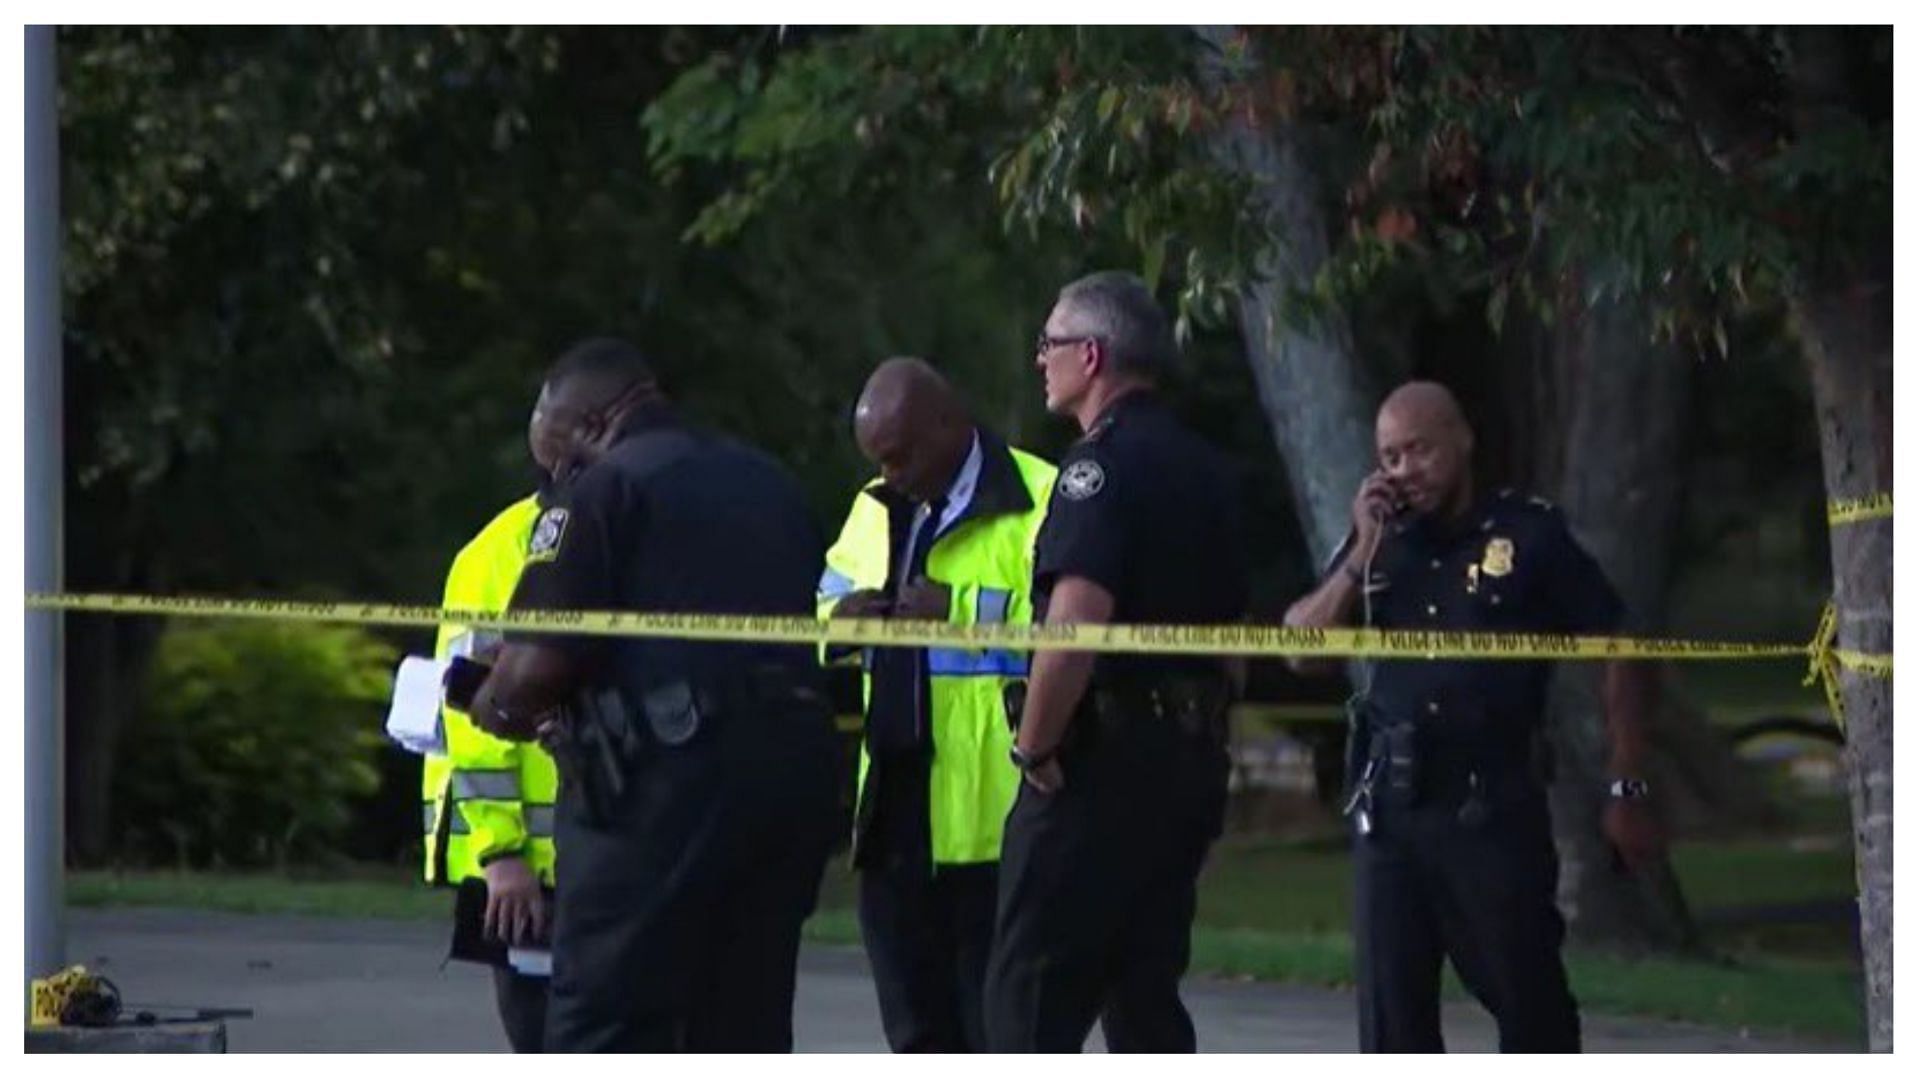 Officials investigating the shooting that took place at Atlanta park (Image via Twitter/MarkTeichner)